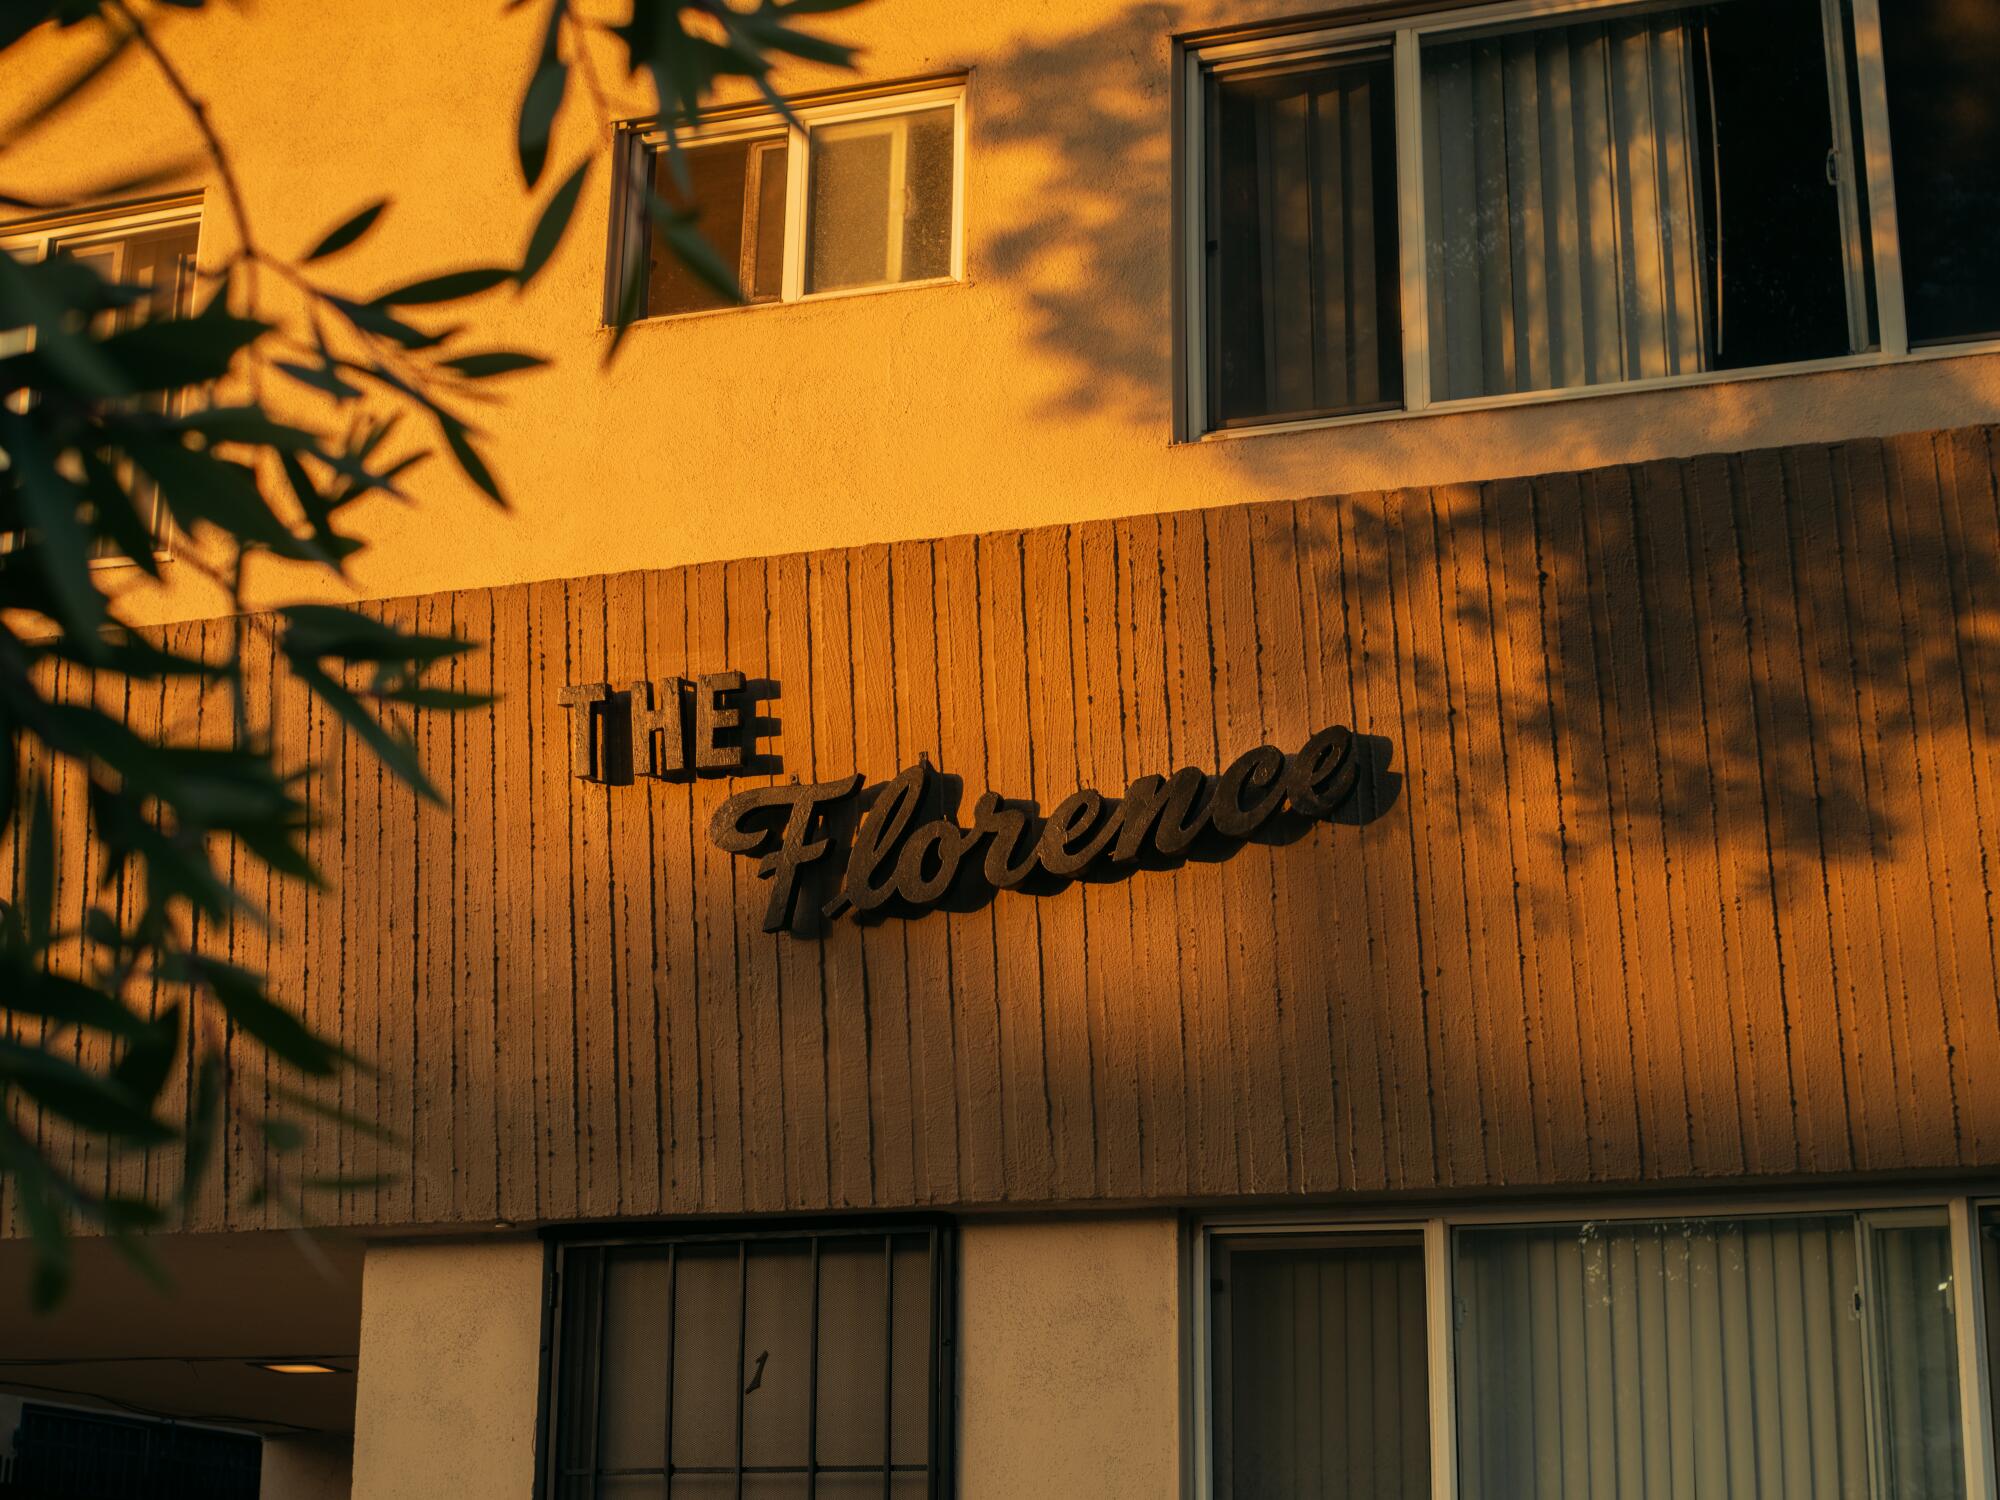 Apartment building sign that reads “The Florence.”